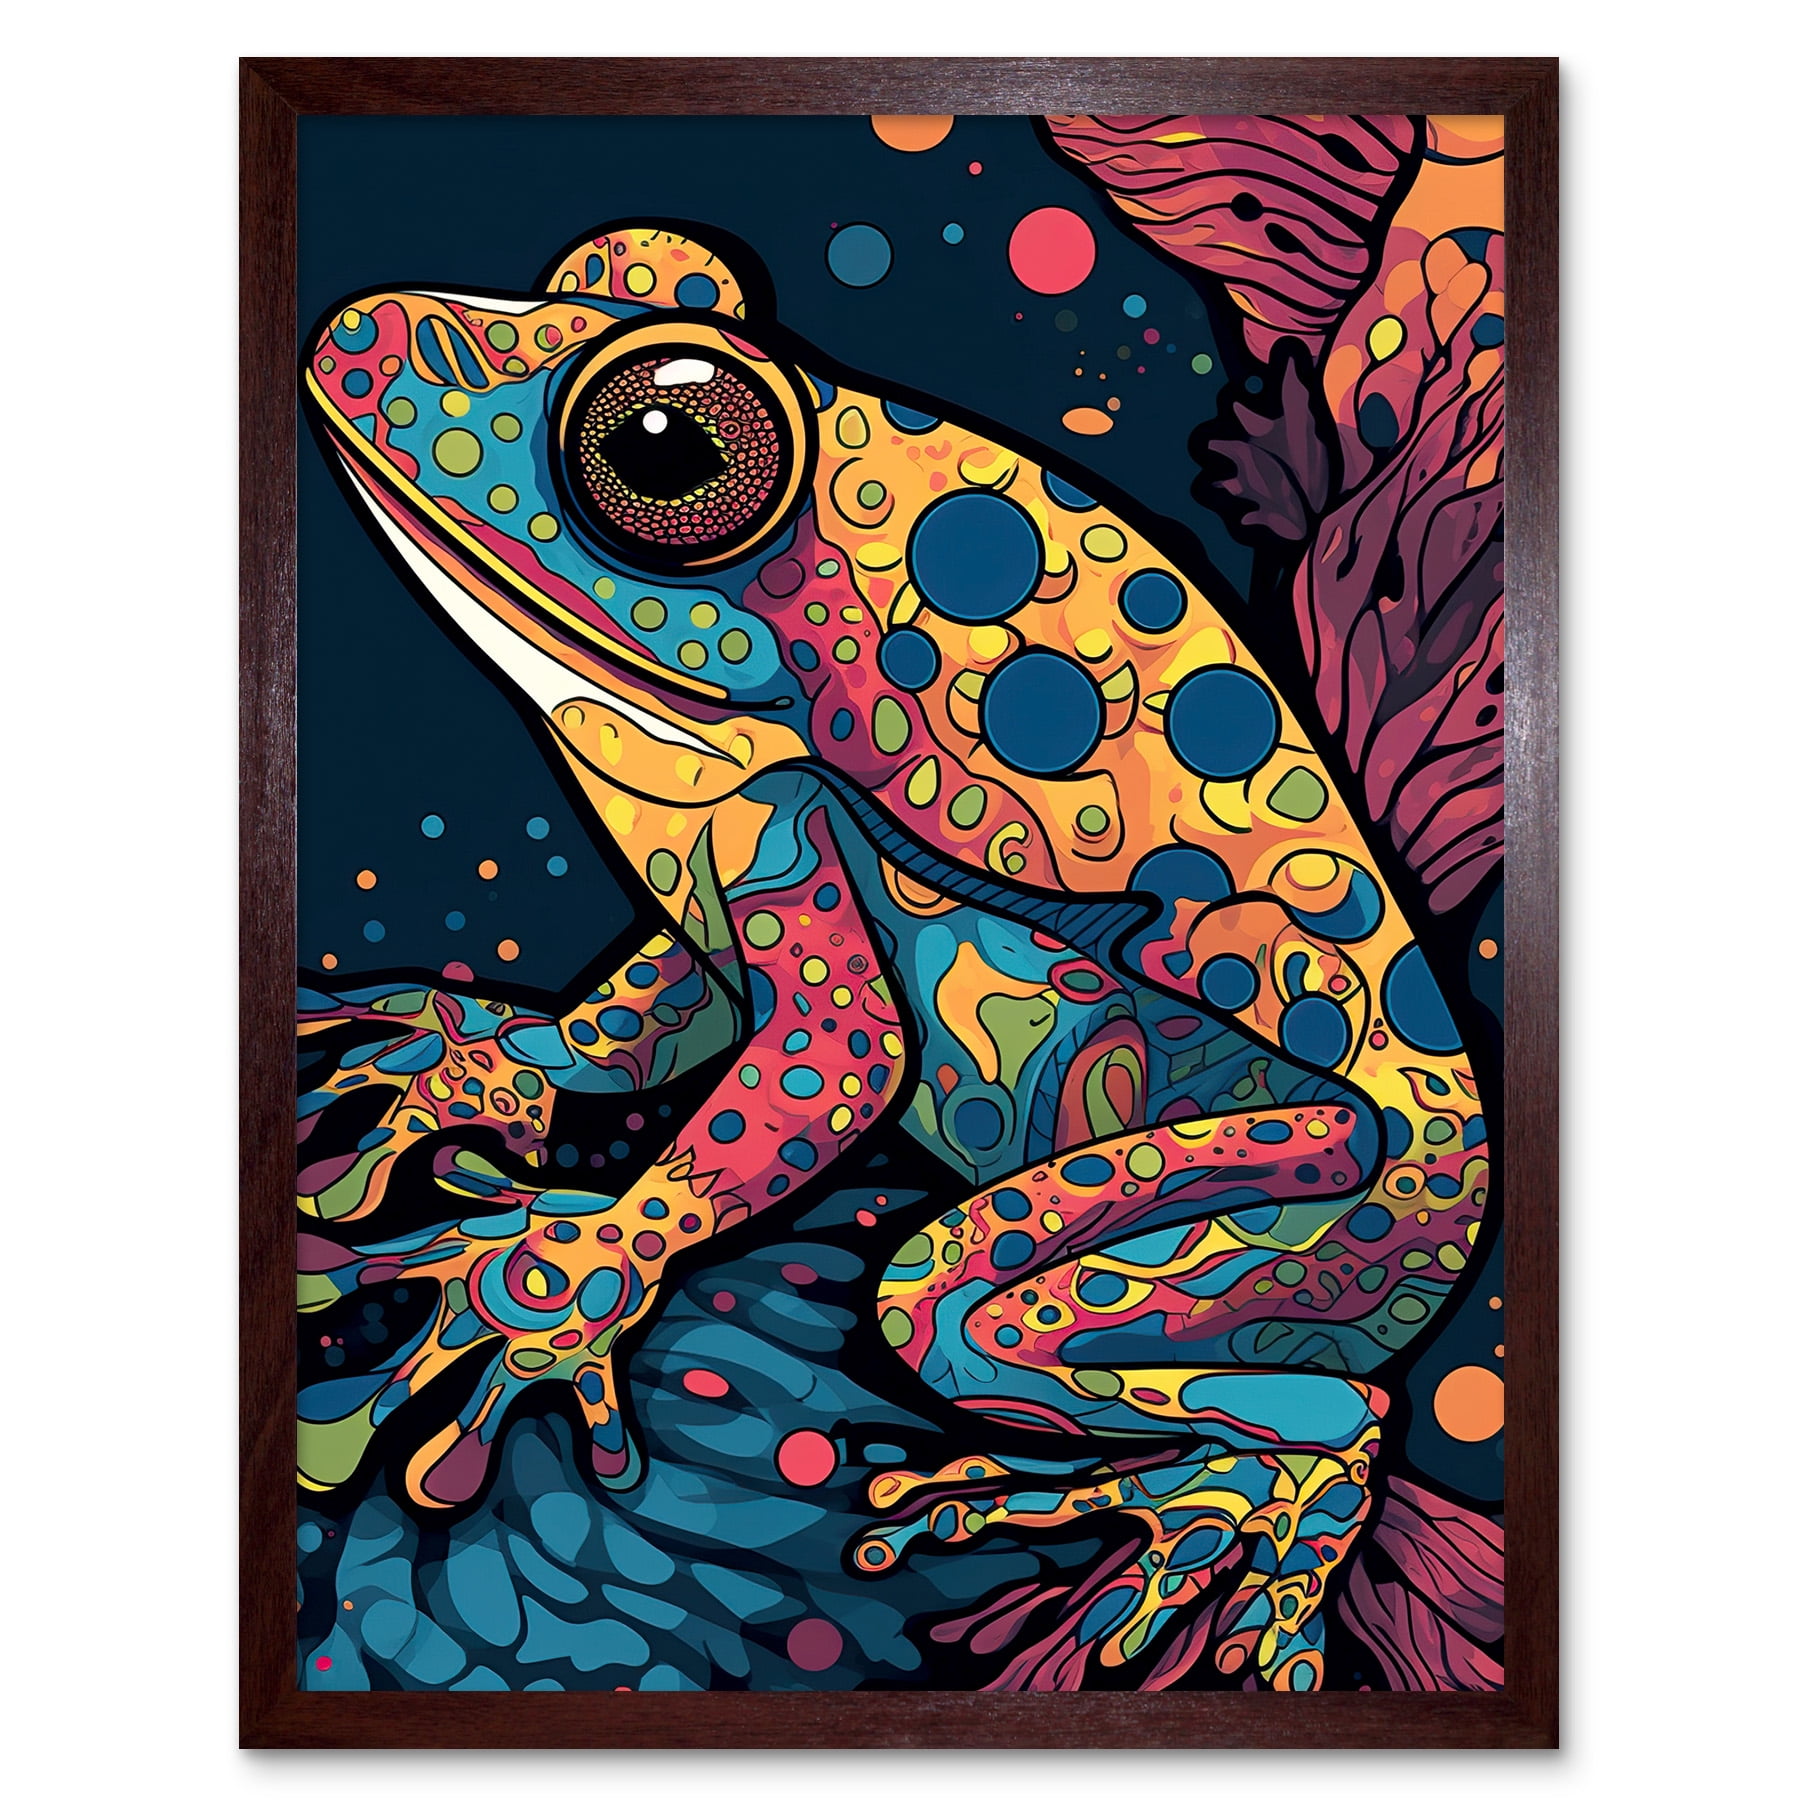 Frog Portrait Acrylic Painting Colourful Psychedelic Patterns Aquatic  Animal Modern Pop Art Art Print Framed Poster Wall Decor 12x16 inch